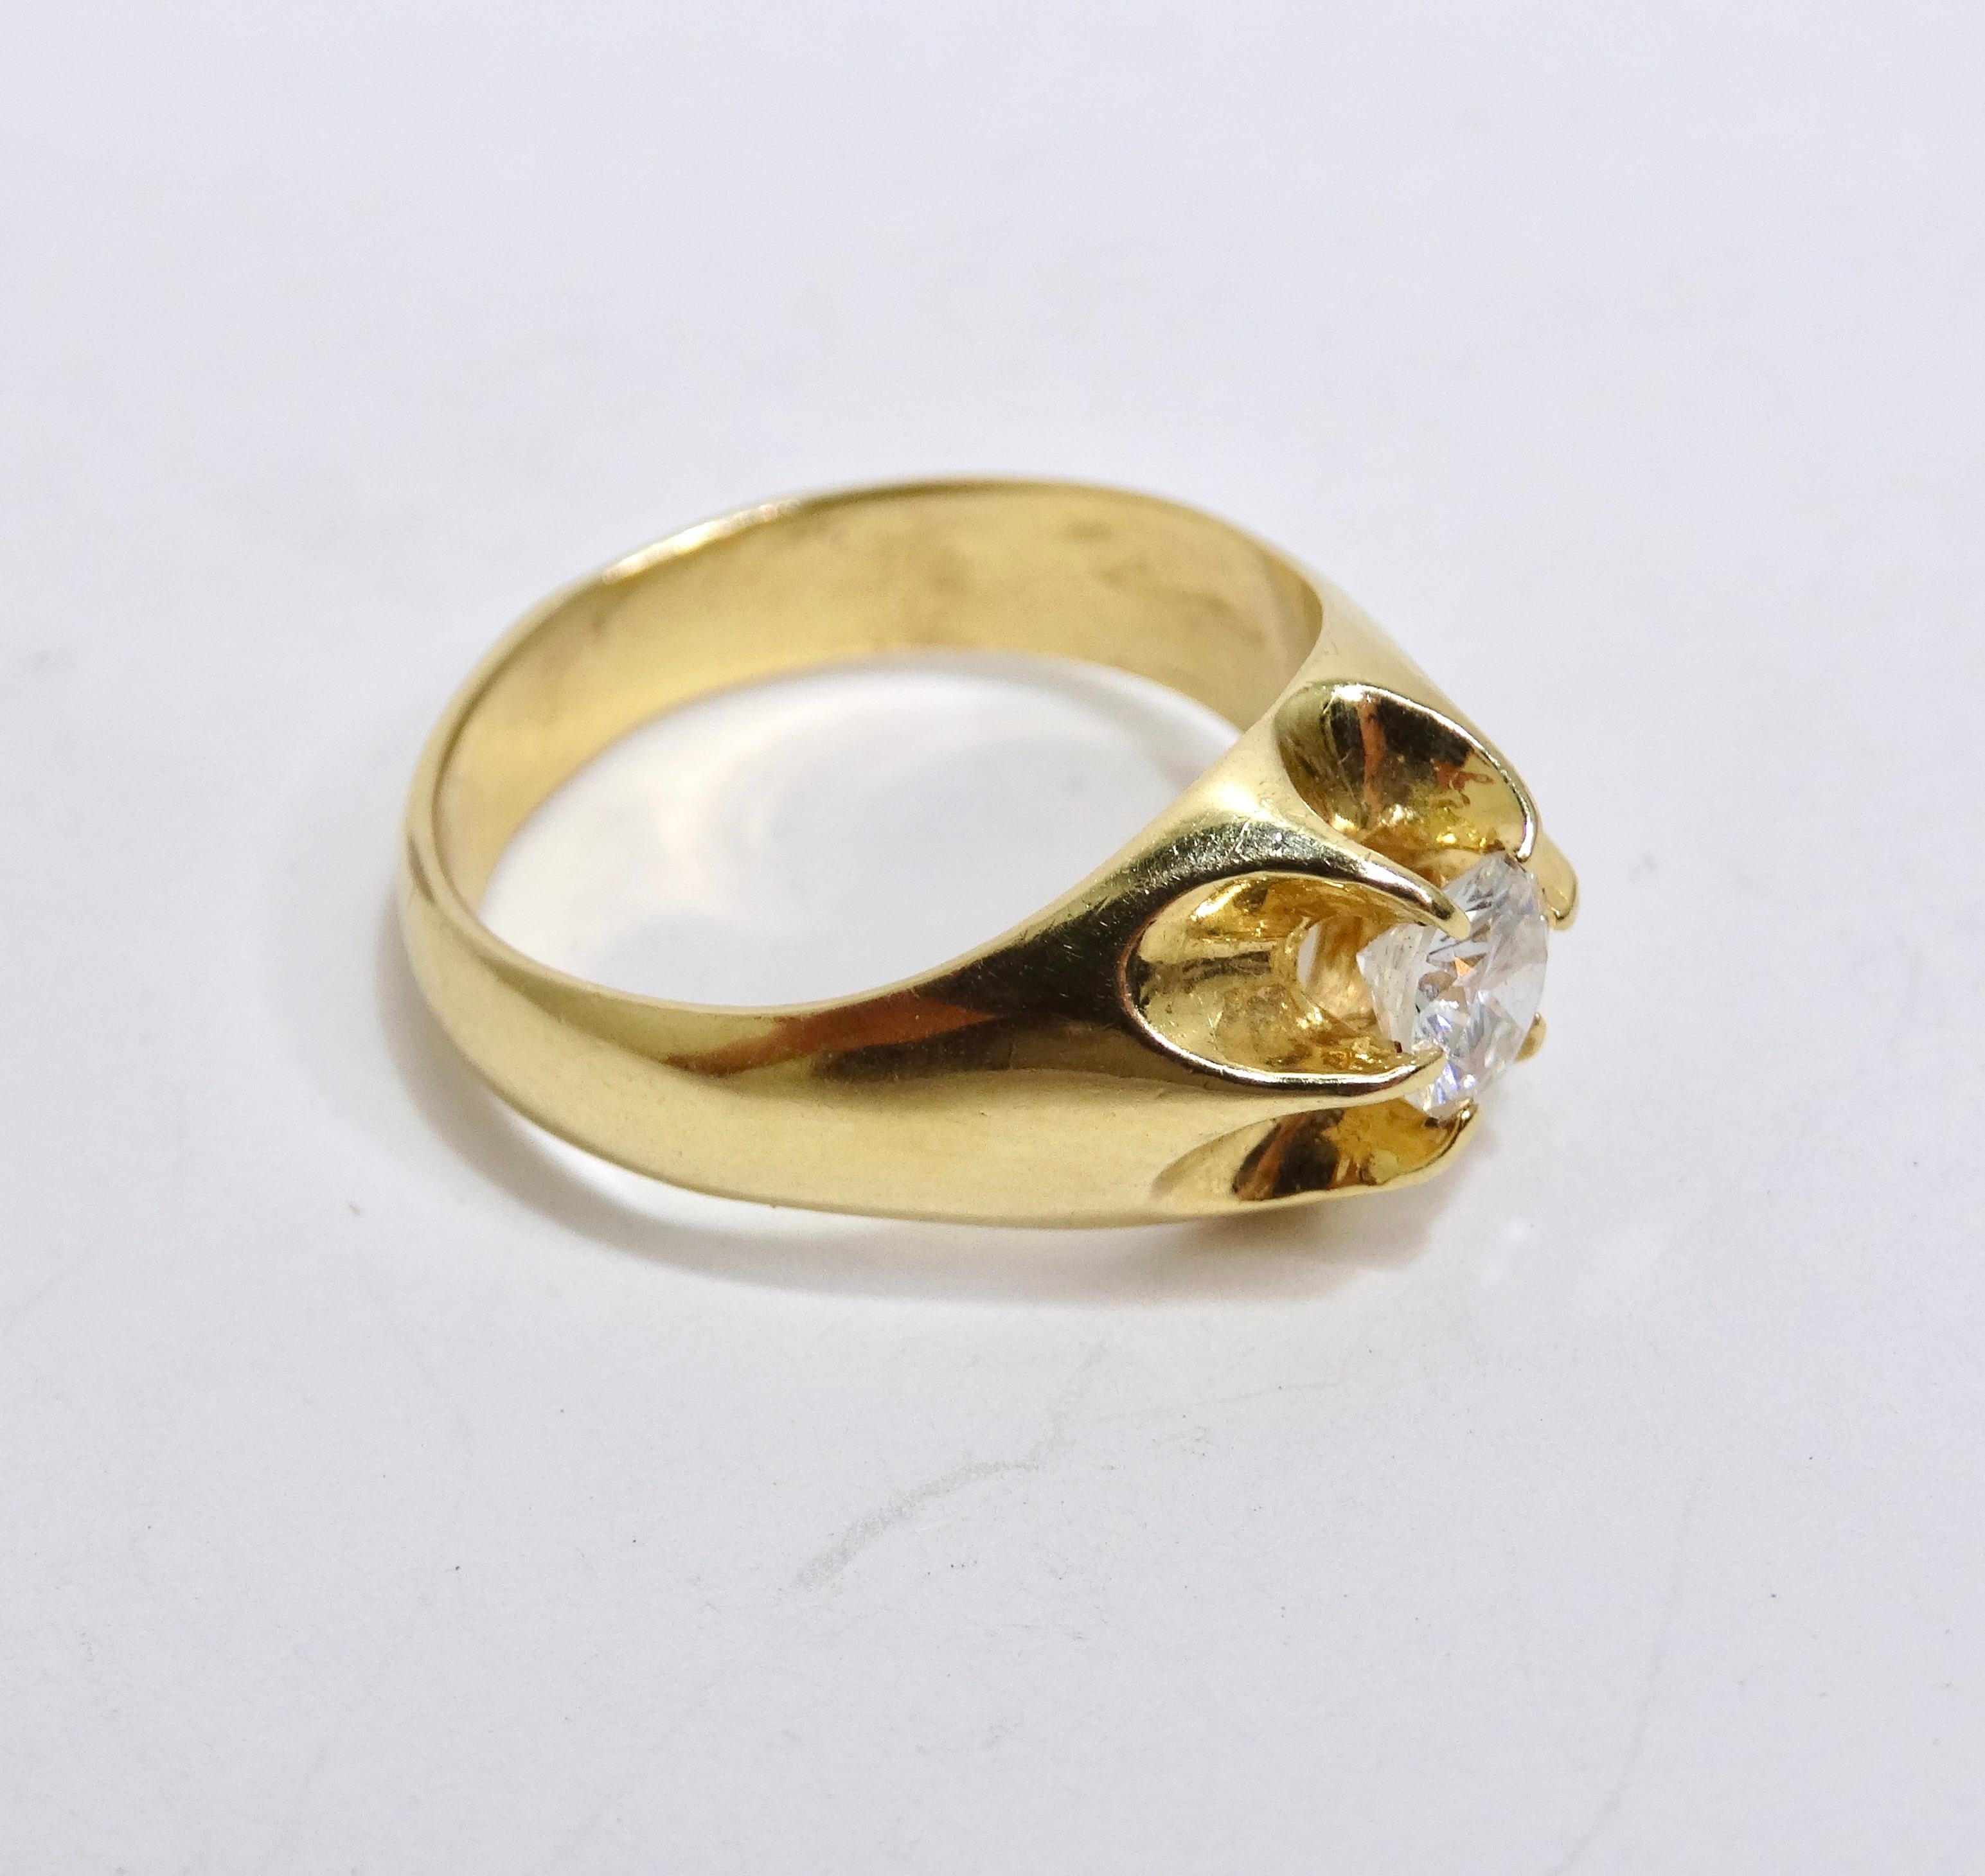 Diamond Solitaire 14k Yellow Gold Ring In Excellent Condition For Sale In Scottsdale, AZ